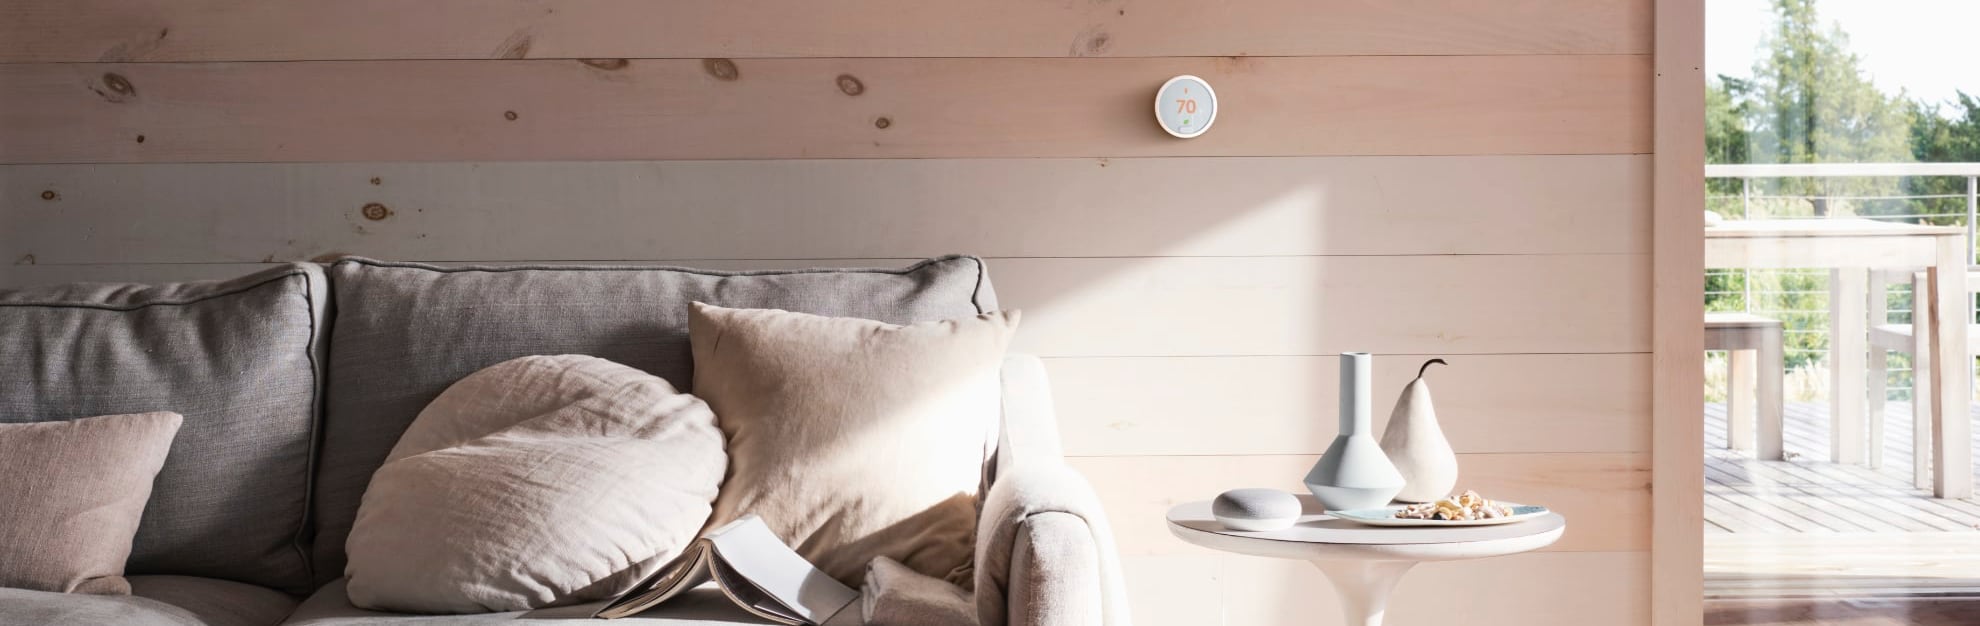 Vivint Home Automation in Boston